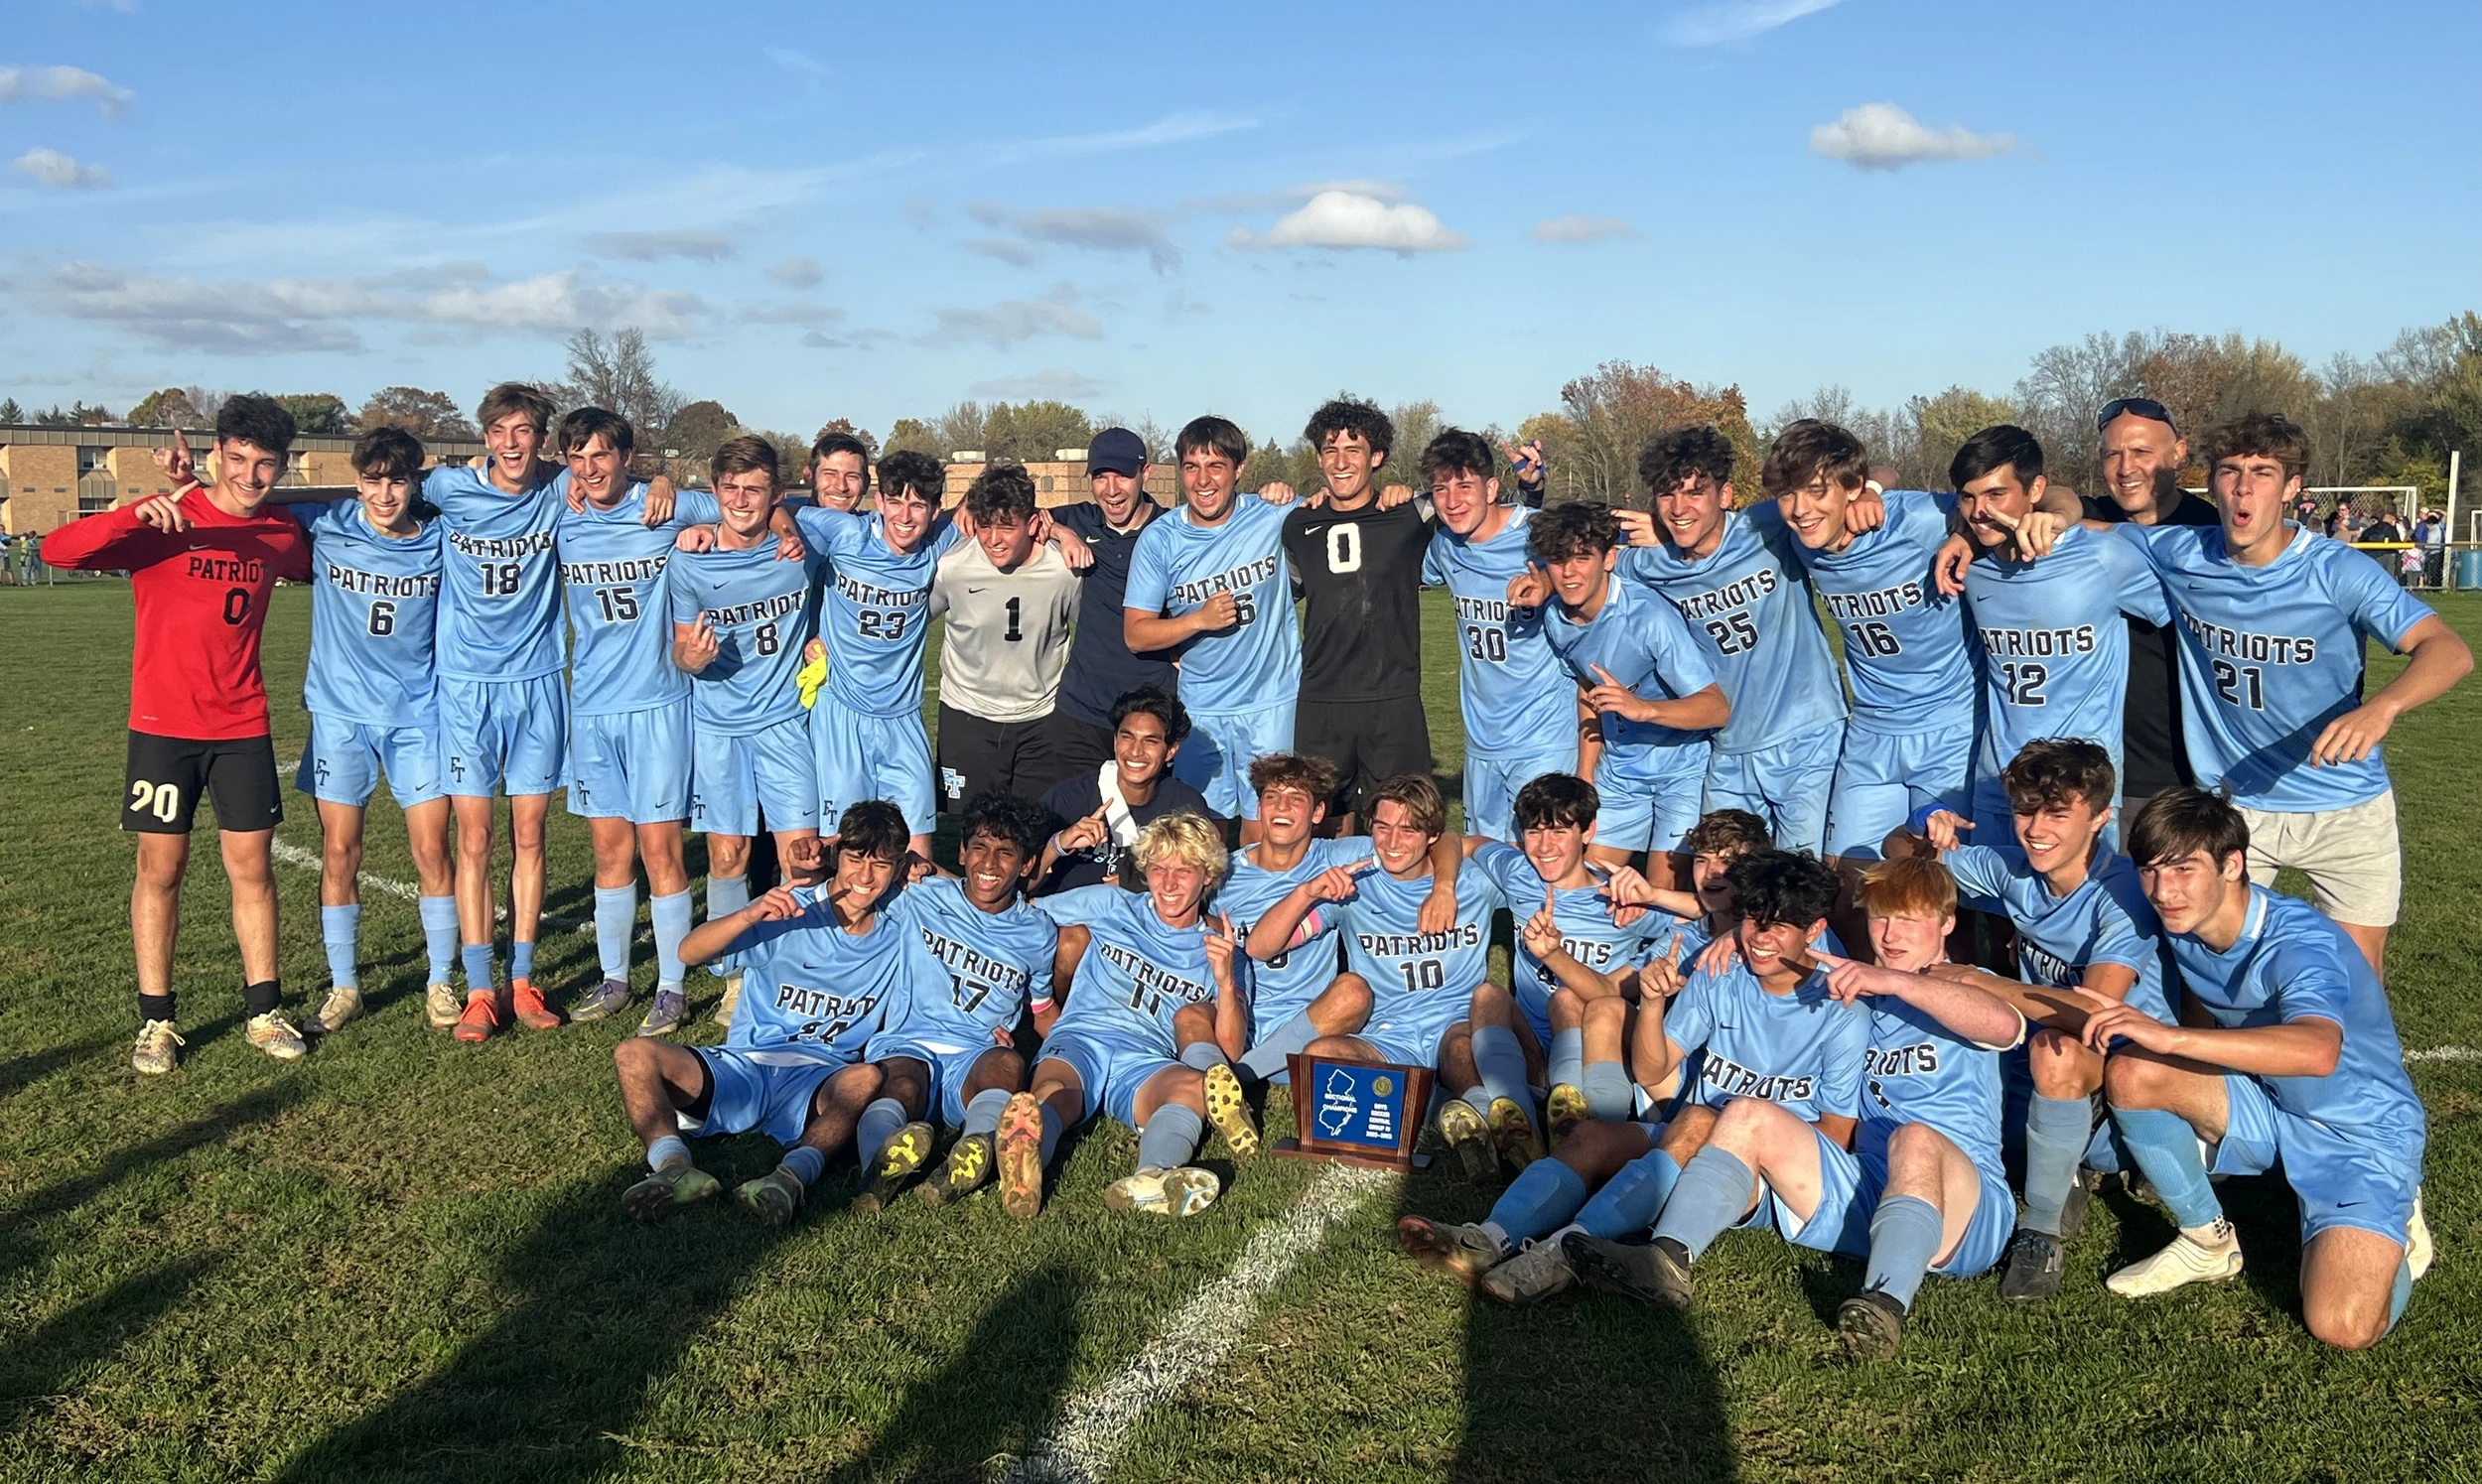 Freehold Twp. Wins Second Straight Boys Soccer Sectional Title